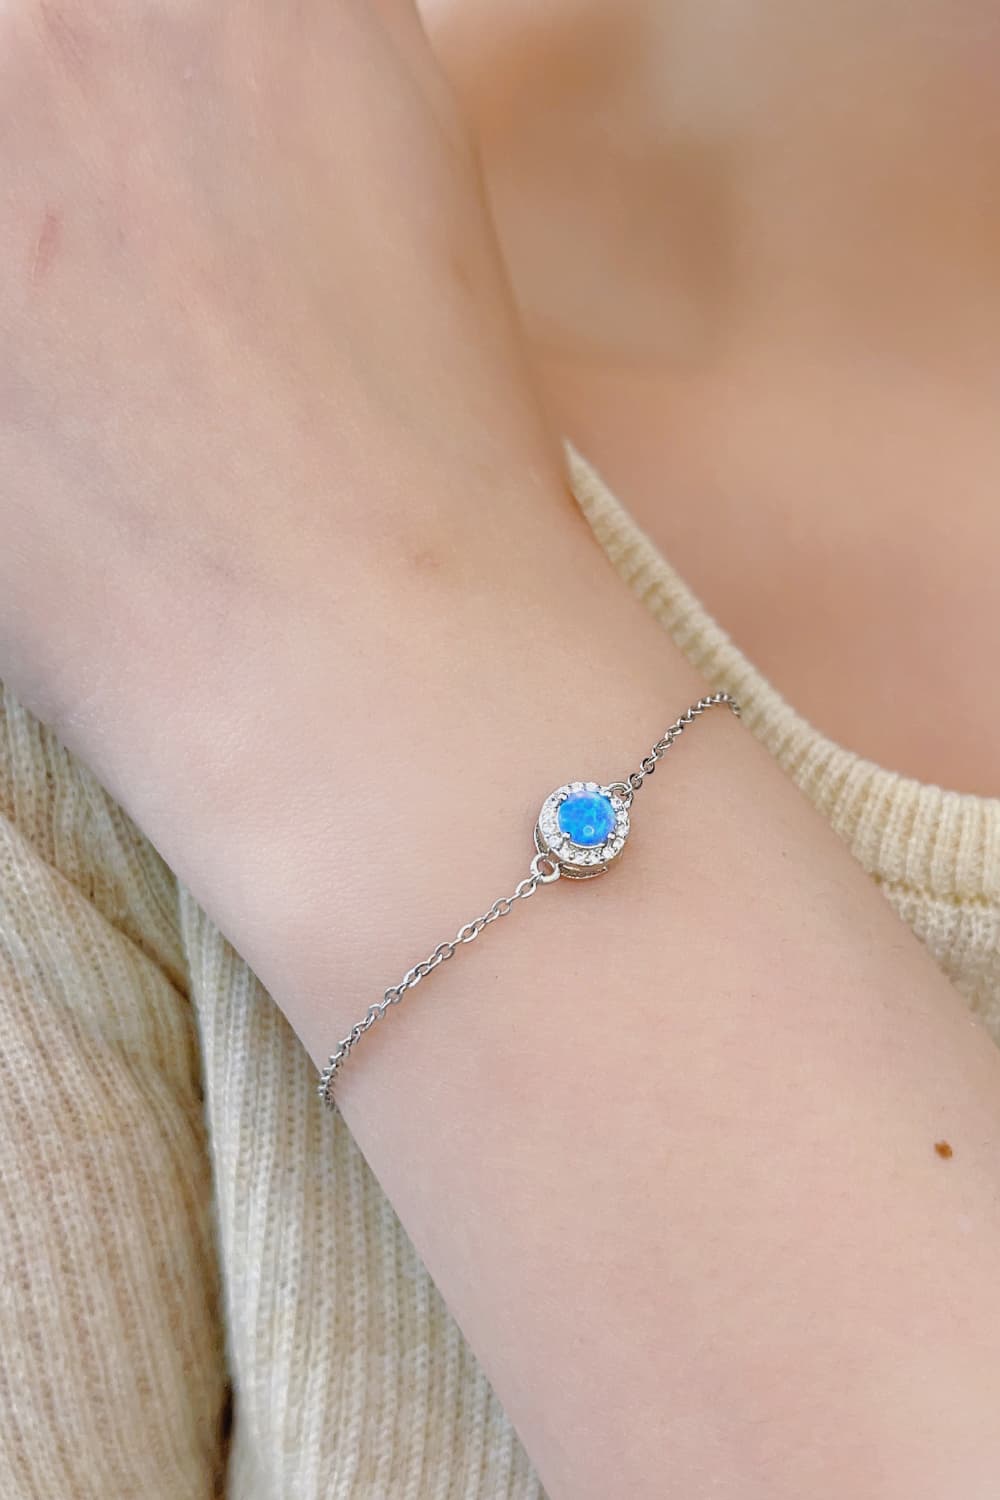 Love You Too Much Opal Bracelet - Kawaii Stop - 925 Sterling Silver, Affectionate Gift, Australian Opal, Bracelet, Bracelets, CHAMSS, Chic and Simple, Delicate Bracelet, Elegant Design, Gemstone Jewelry, Gift for Her, Heartfelt Gesture, Jewelry Care, Love and Affection, Love Jewelry, Minimalist Style, Opal Bracelet, Platinum Plated, Premium Quality, Ship From Overseas, Shipping Delay 09/29/2023 - 10/04/2023, Stylish Accessories, Symbol of Love, Thoughtful Present